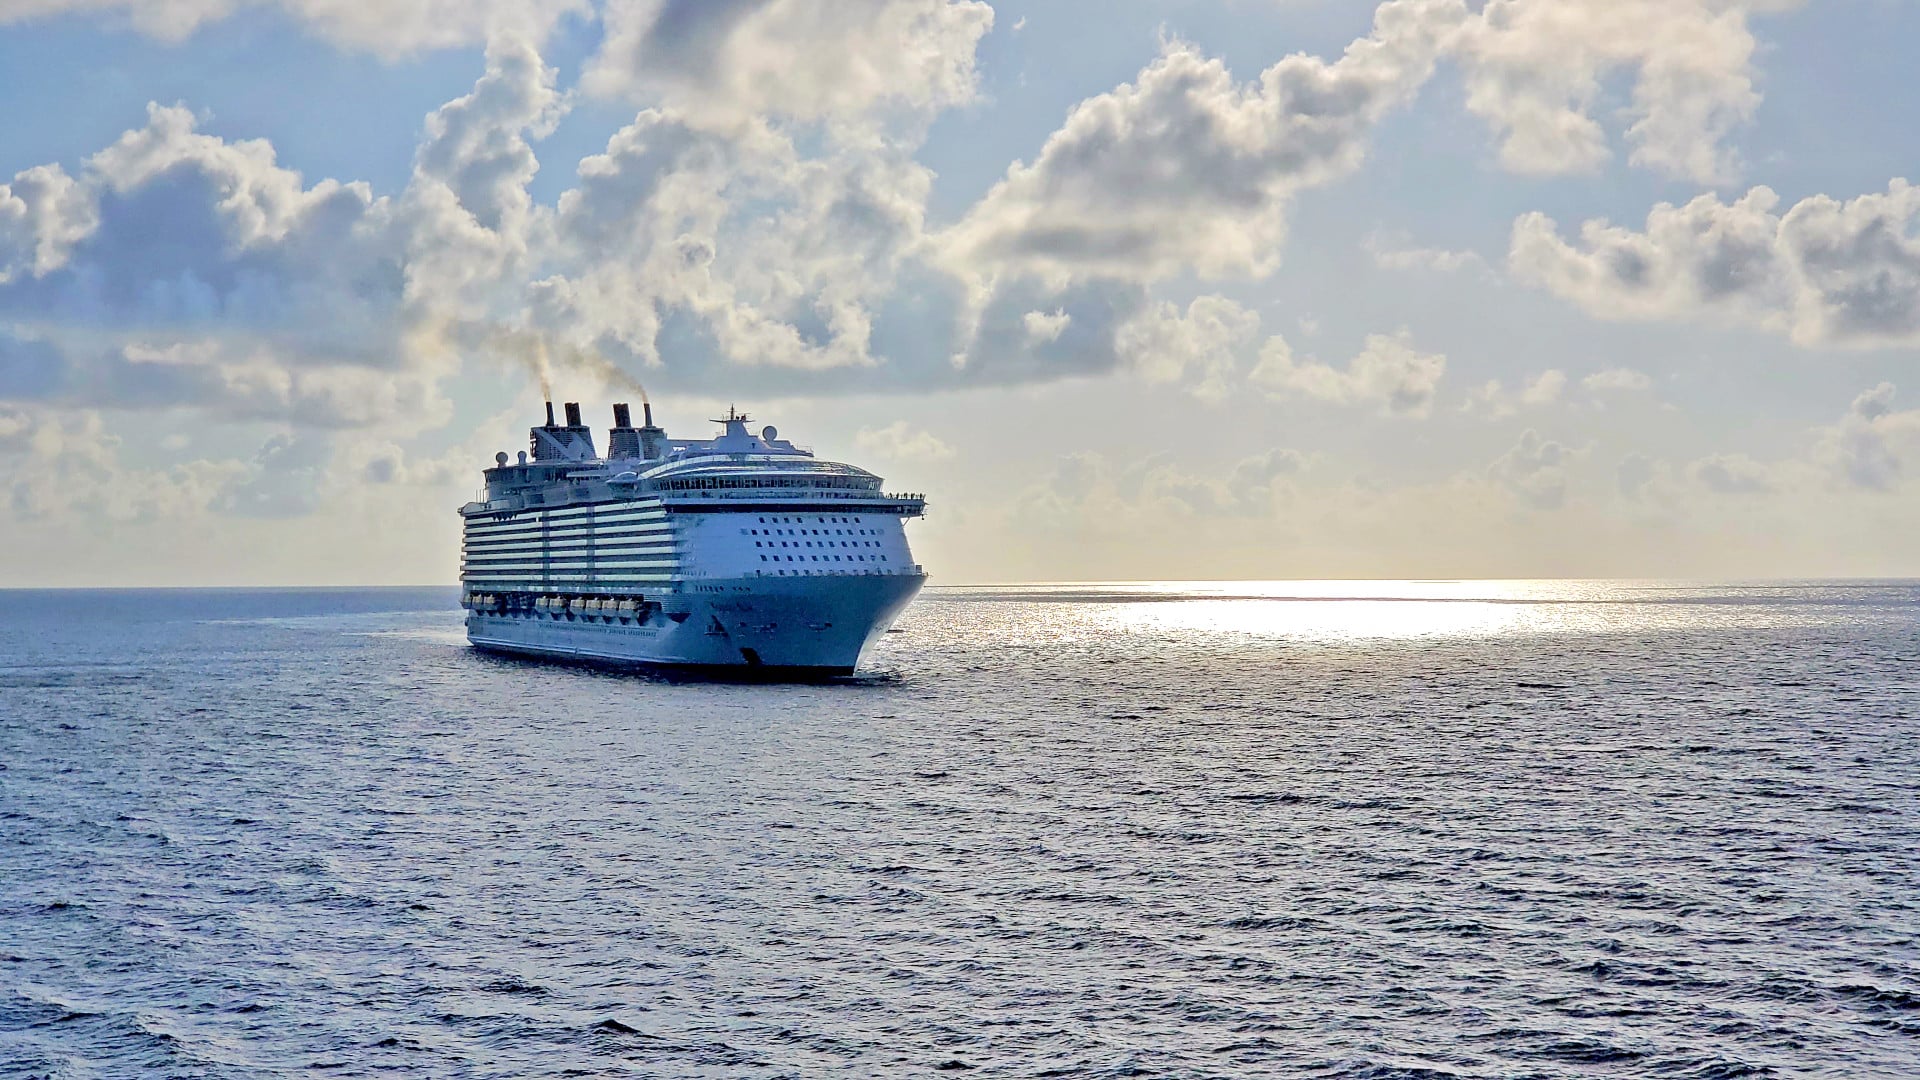 Allure of the Seas out at sea